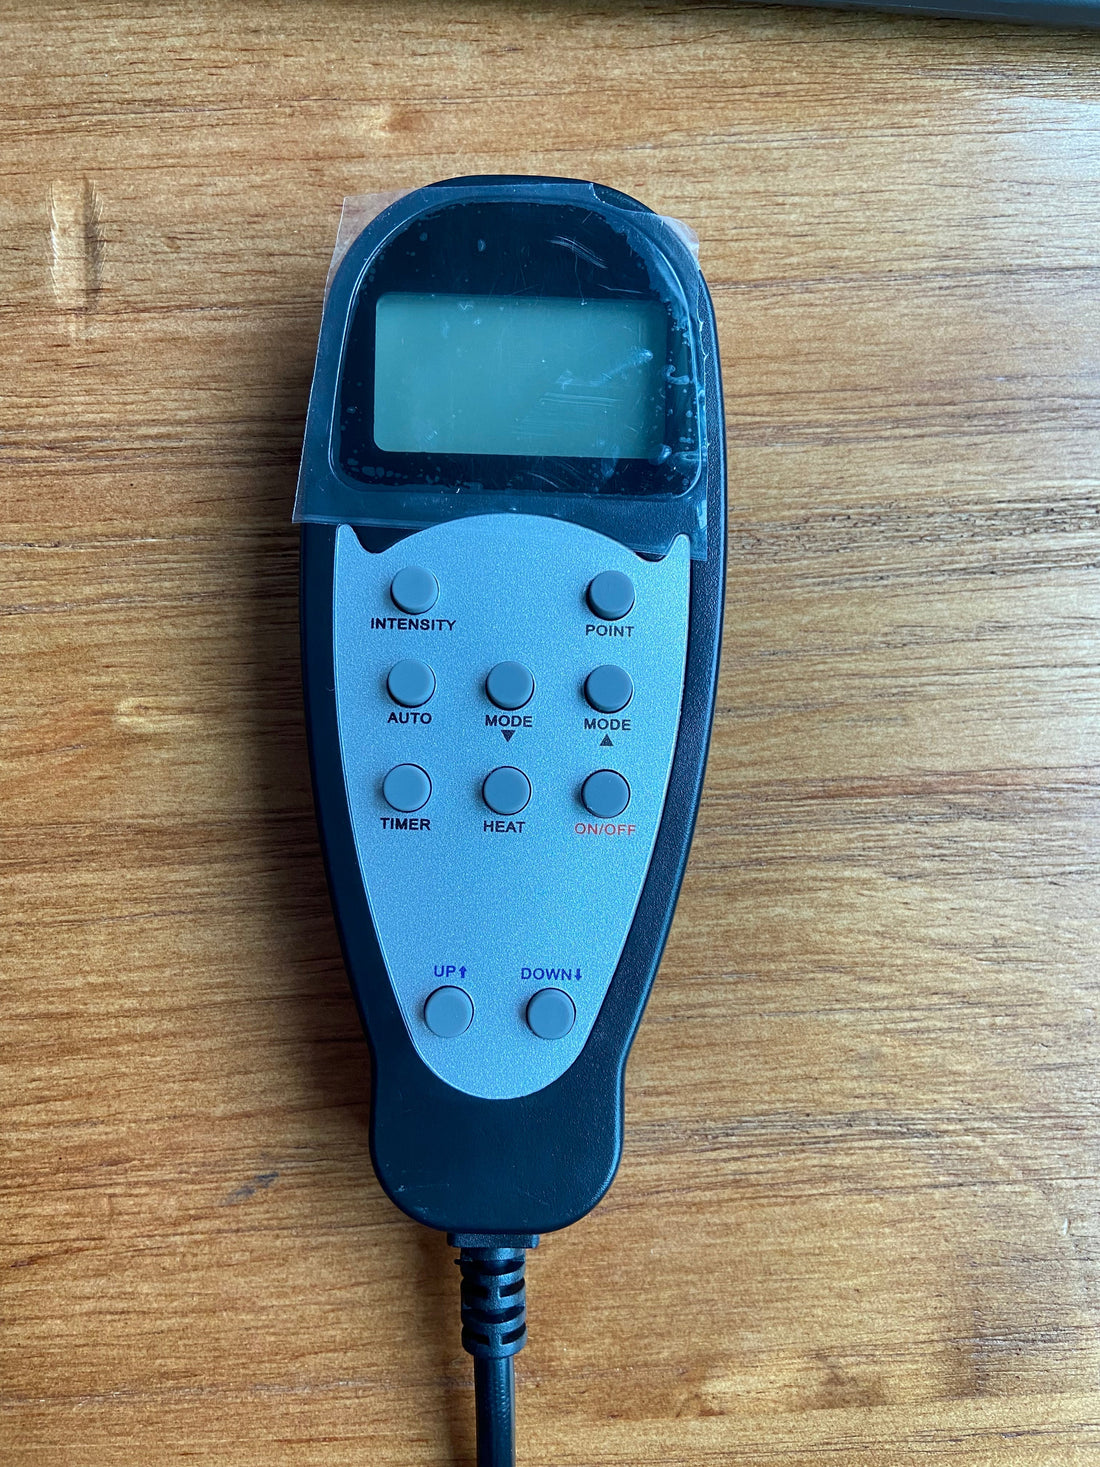 Replacement Remote Controller for the Lifesmart Lift Chair